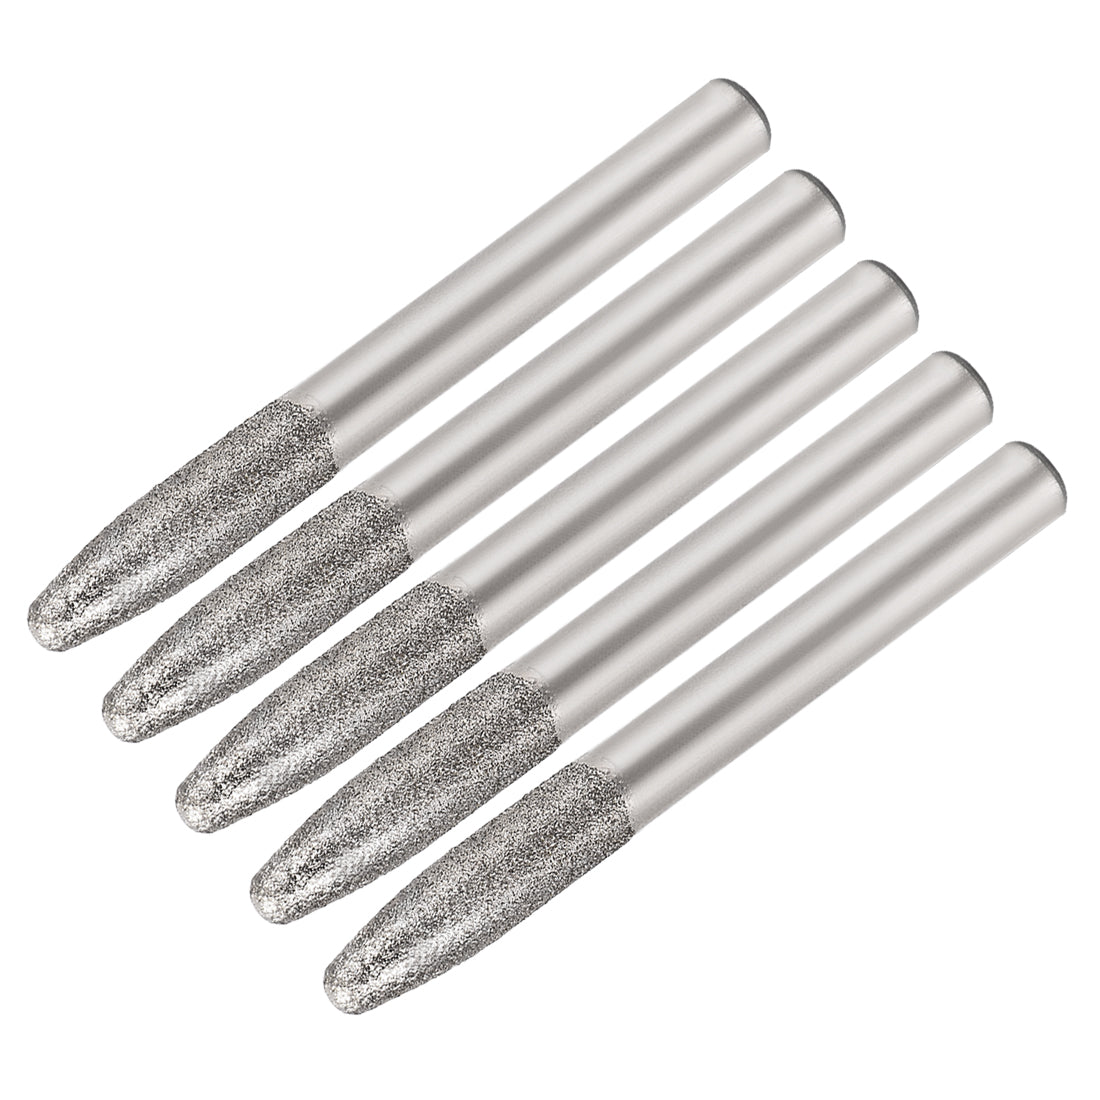 Uxcell Uxcell Diamond Burrs Grinding Drill Bits for Carving Rotary Tool 1/4-Inch Shank 8mm Tapered 150 Grit 5 Pcs